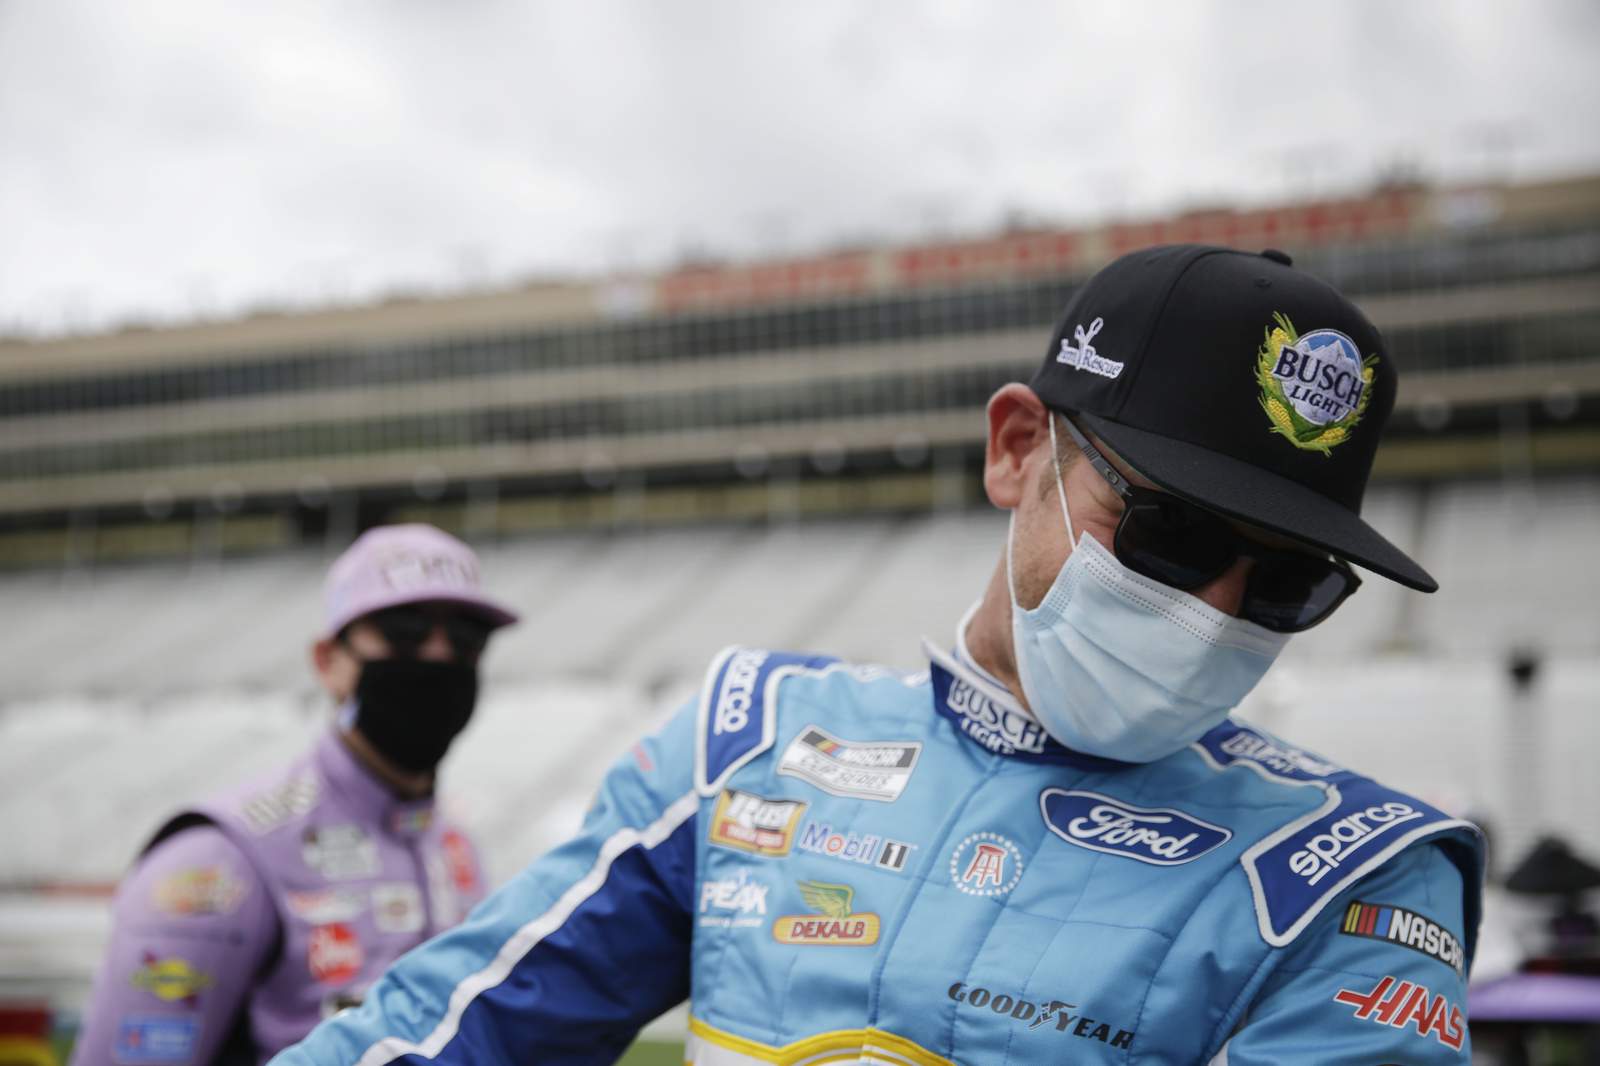 Harvick cruises with another dominant performance in Atlanta